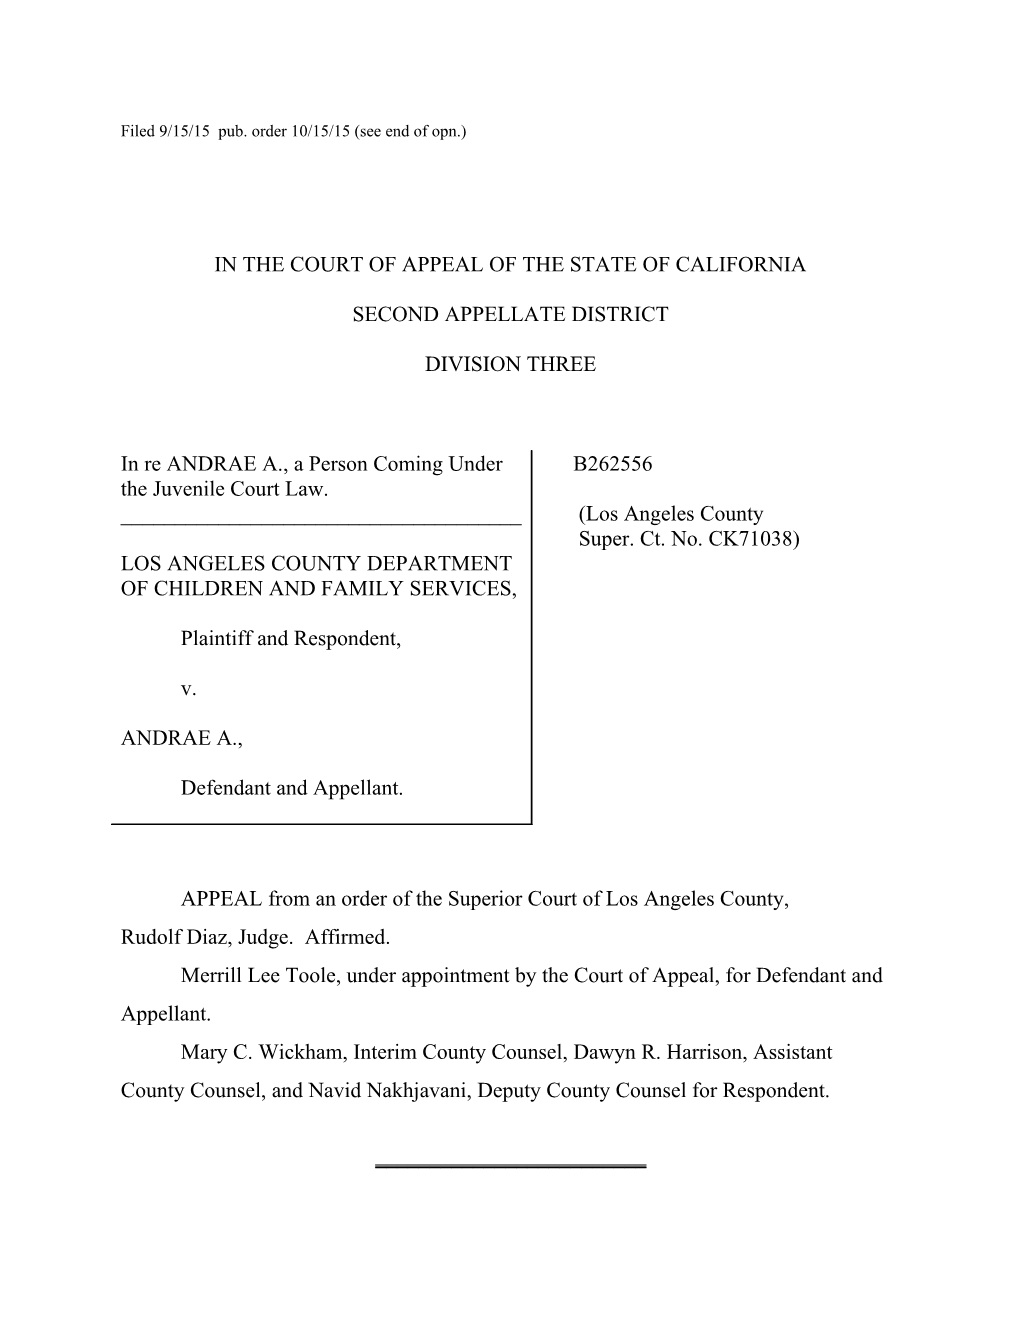 Filed 9/15/15 Pub. Order 10/15/15 (See End of Opn.)